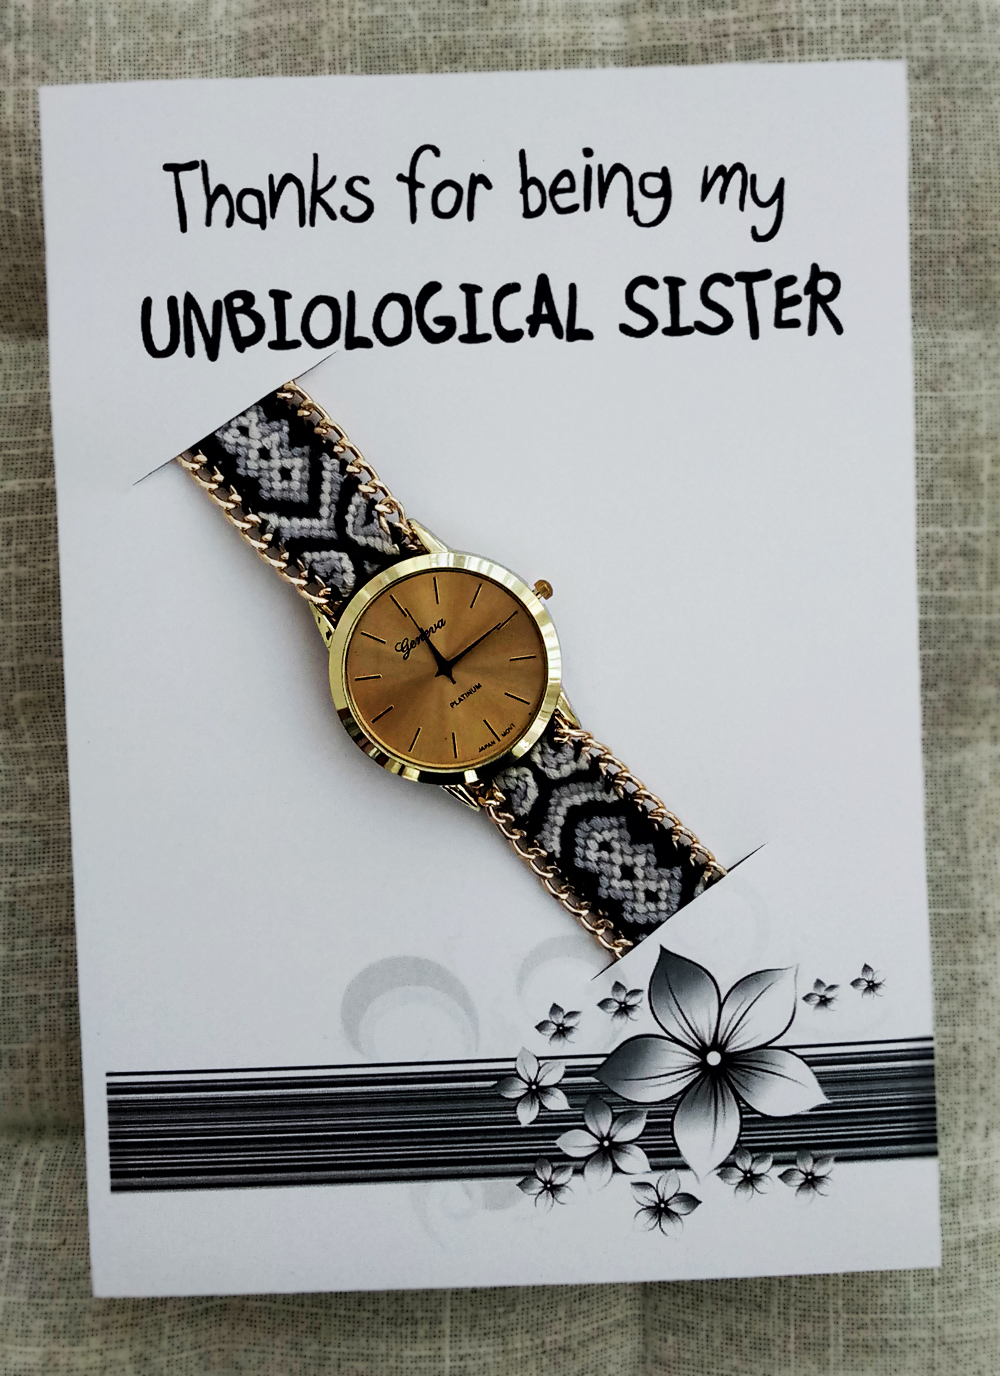 Black-white Band Hippie Wrist Watch Unisex Holidays Gift Fashiponthanks For Being My Unbiological Sister Watch